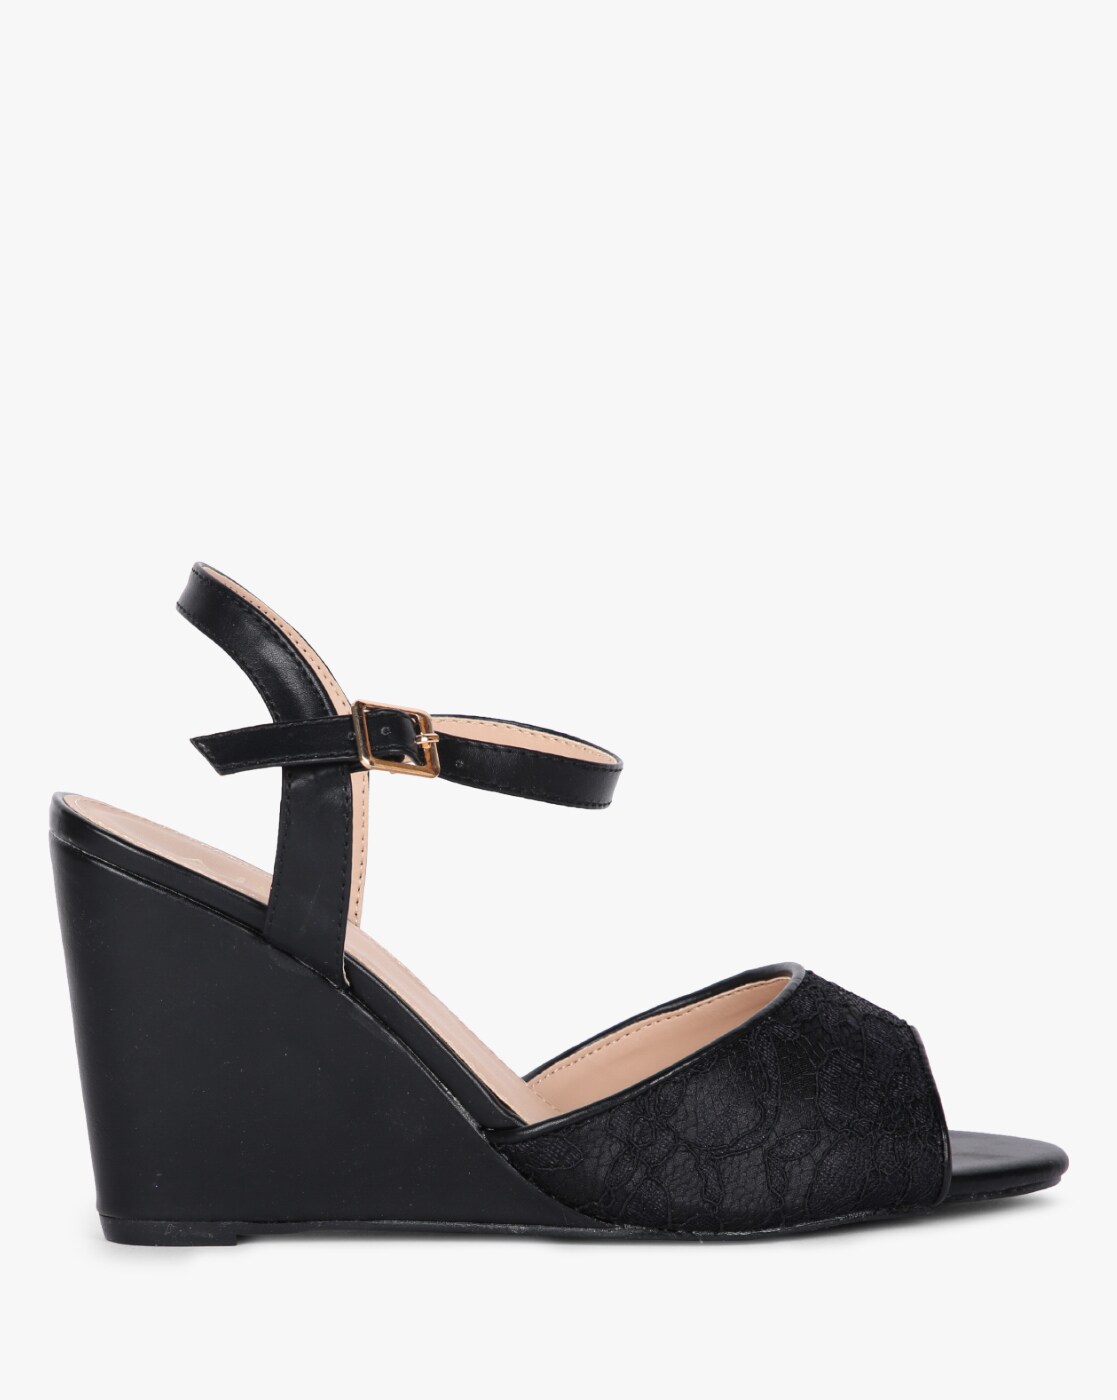 black peep toe wedges with ankle strap